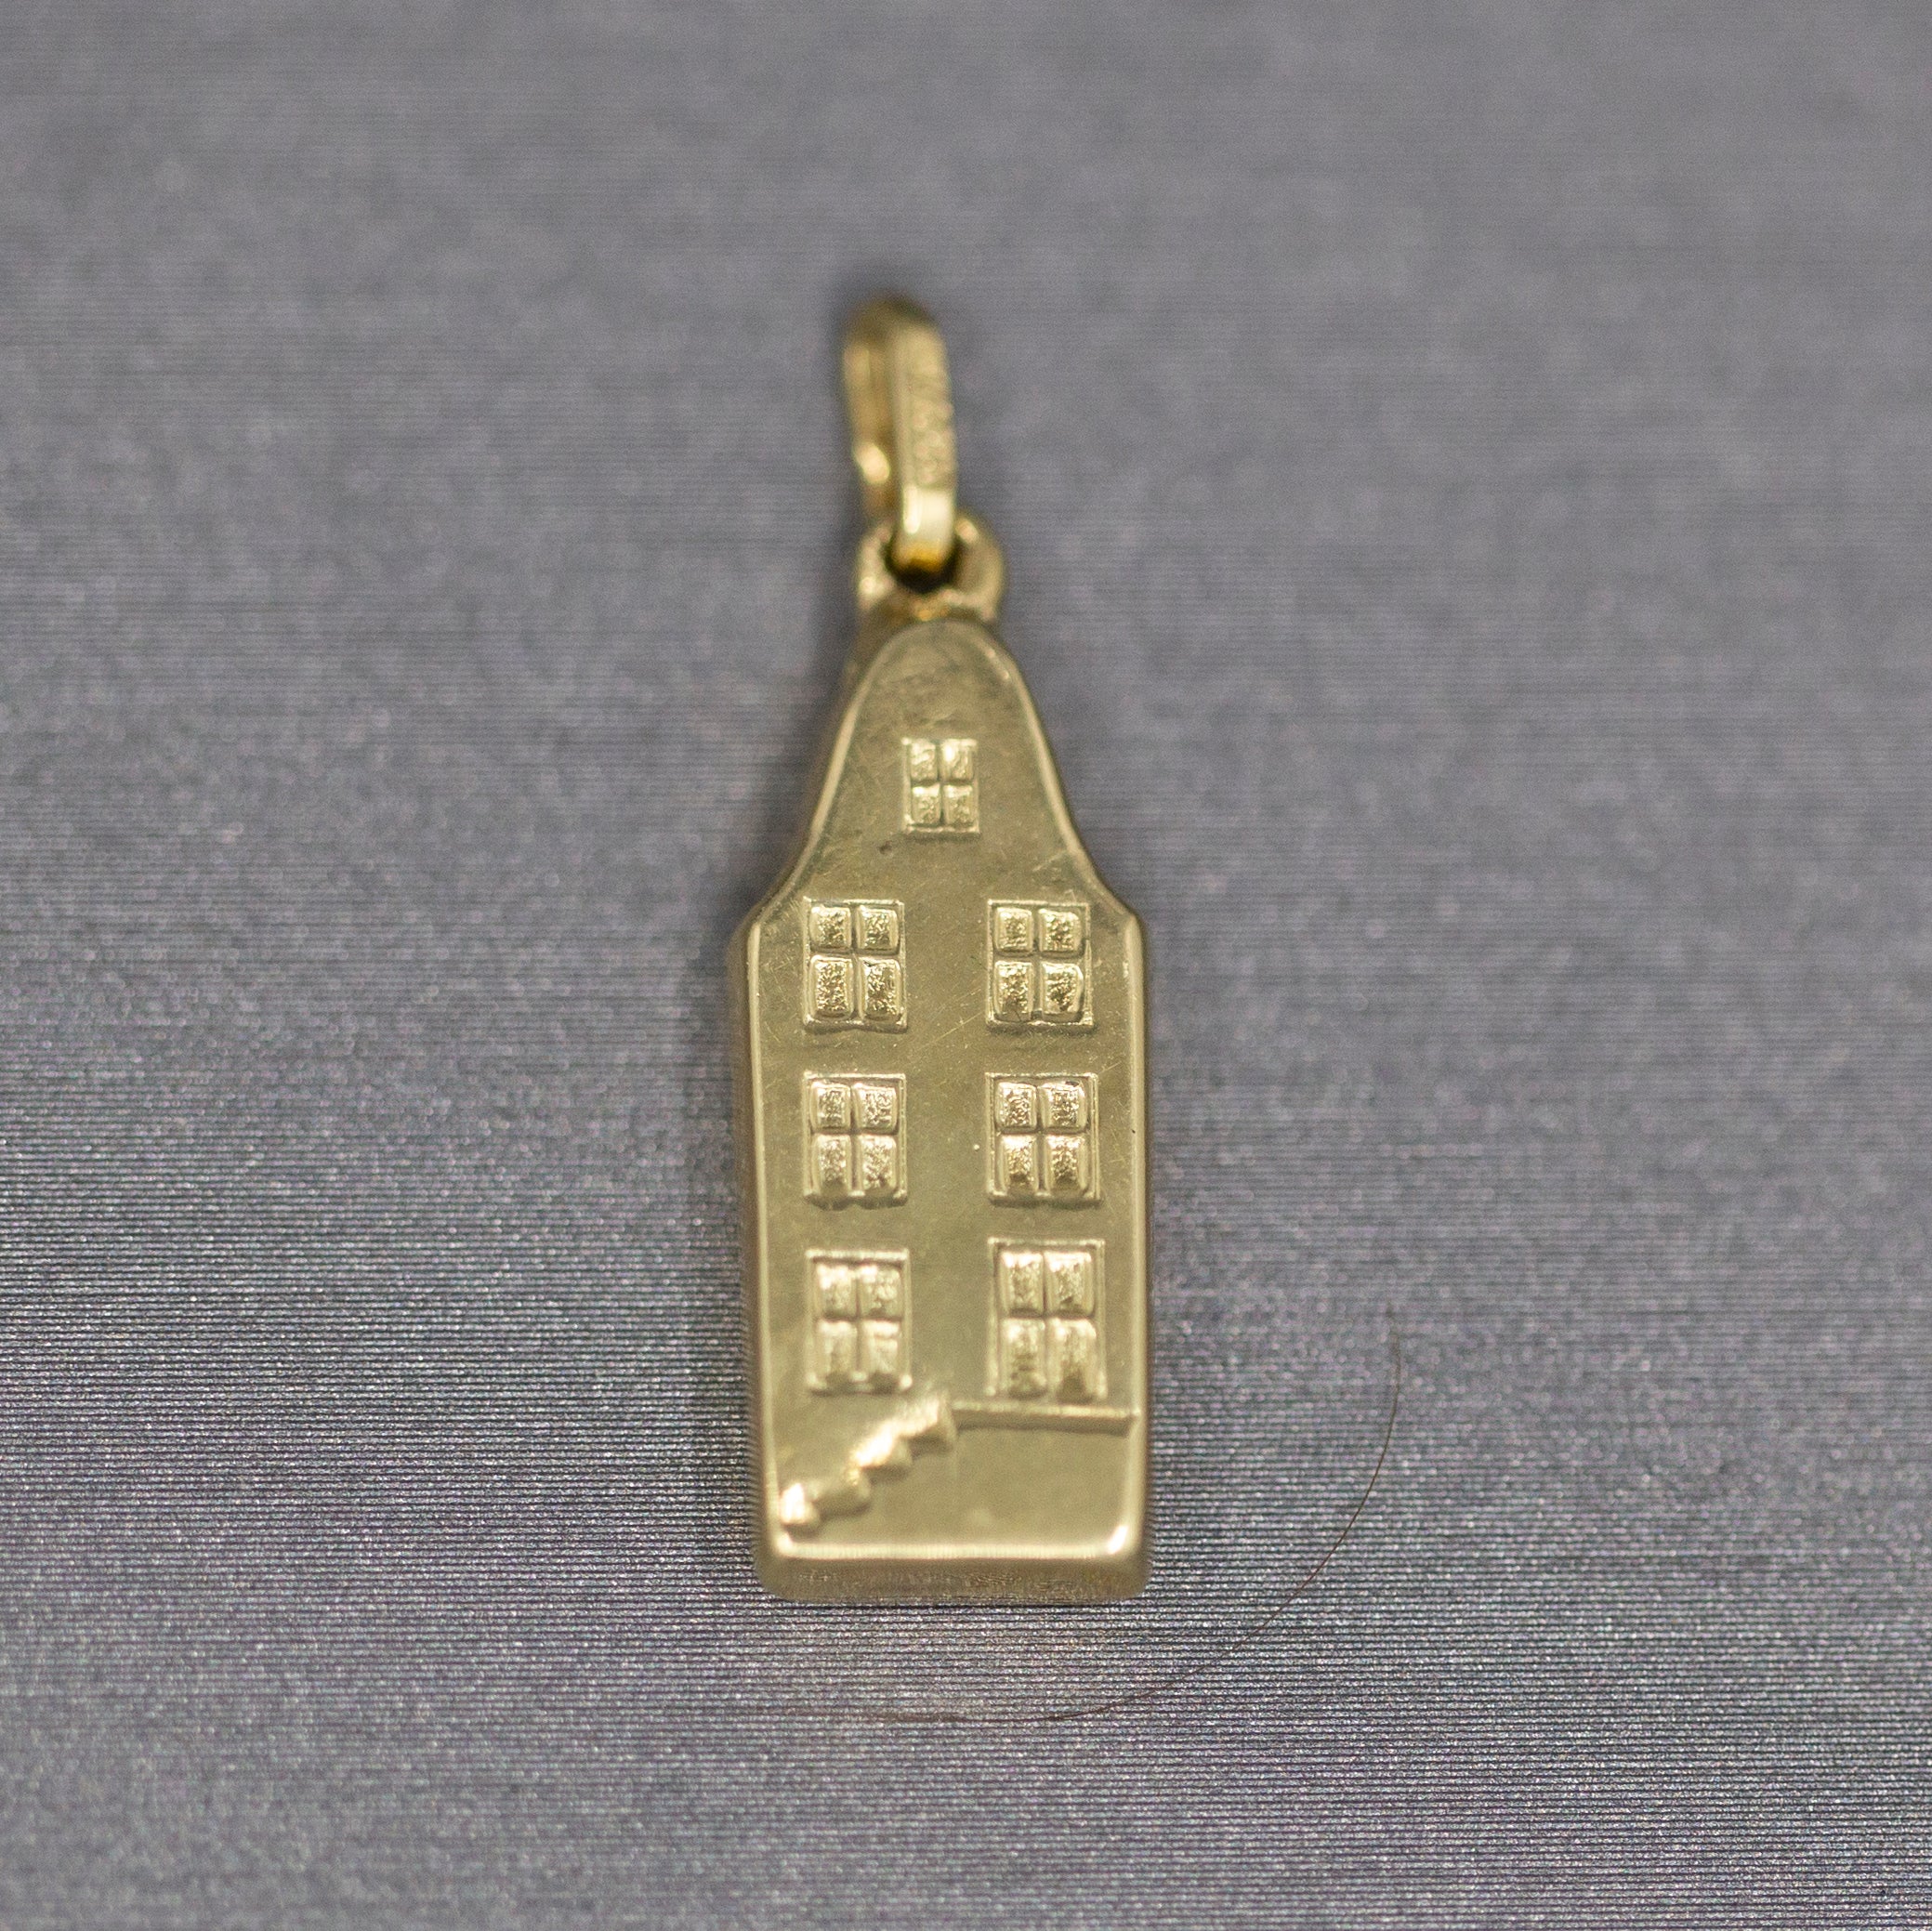 Dutch Holland Amsterdam Canal House Charm Pendant in 14k Yellow Gold